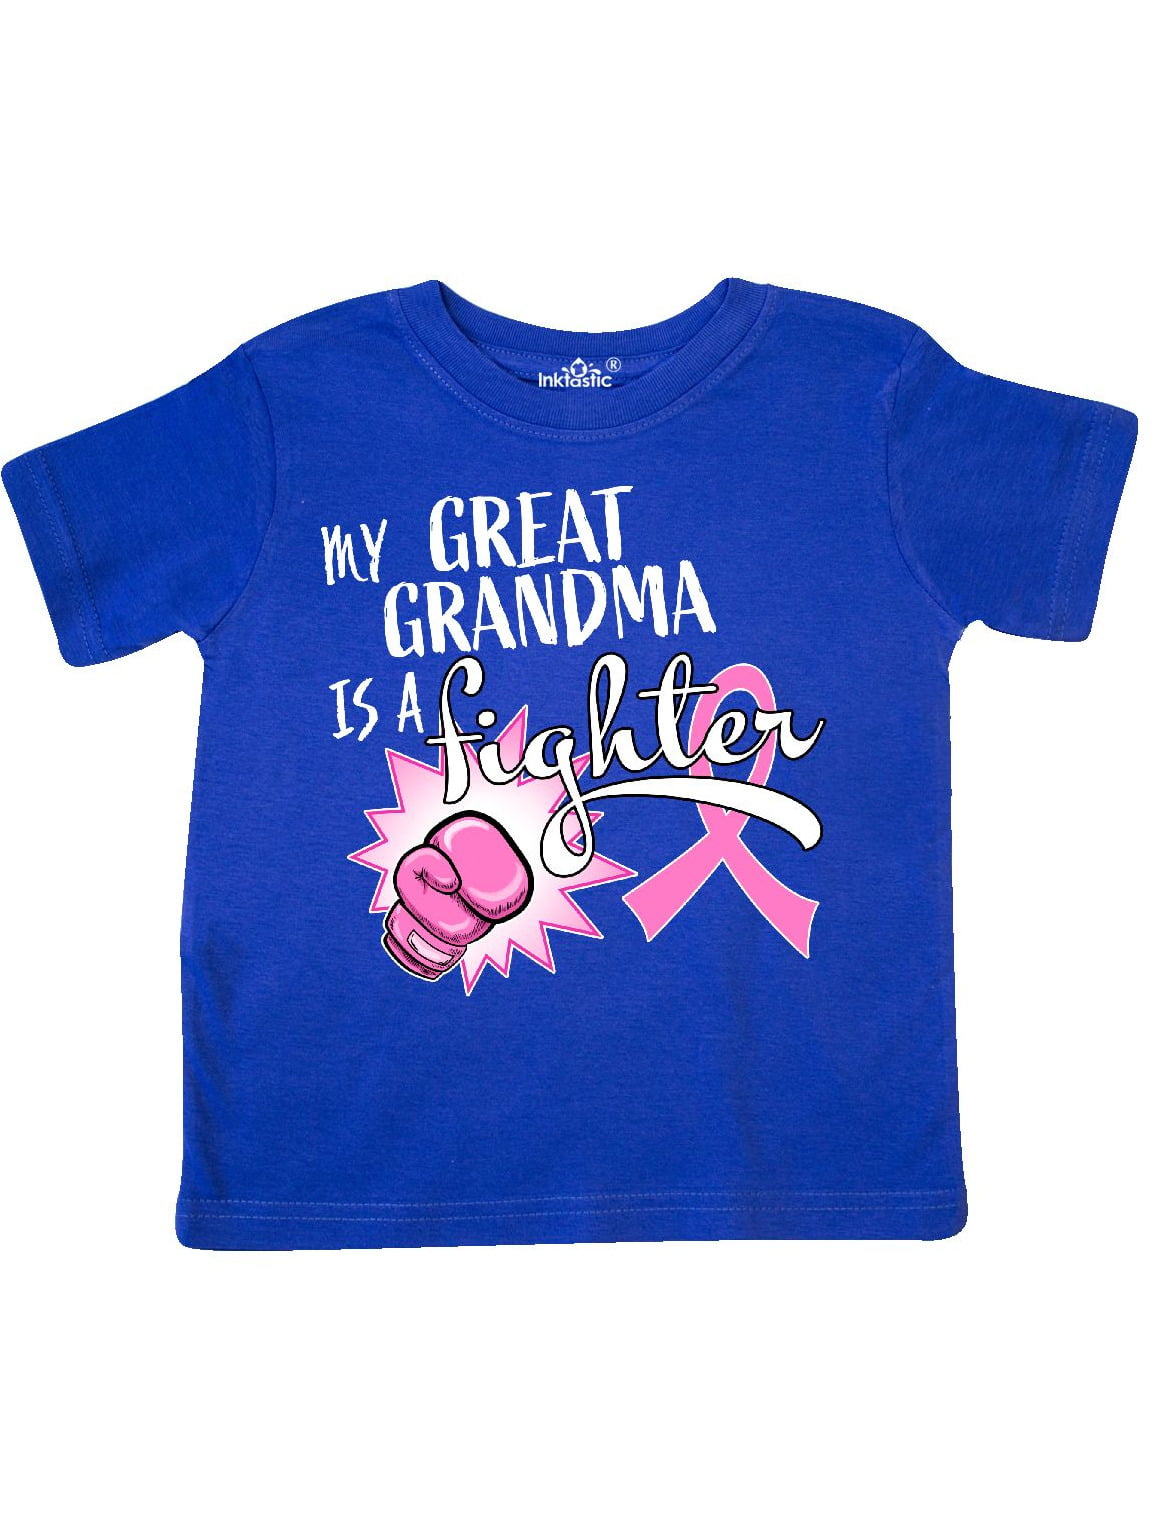 Just Like My Great-Grandma Im Going to Love Dogs When I Grow Up Toddler/Kids Raglan T-Shirt